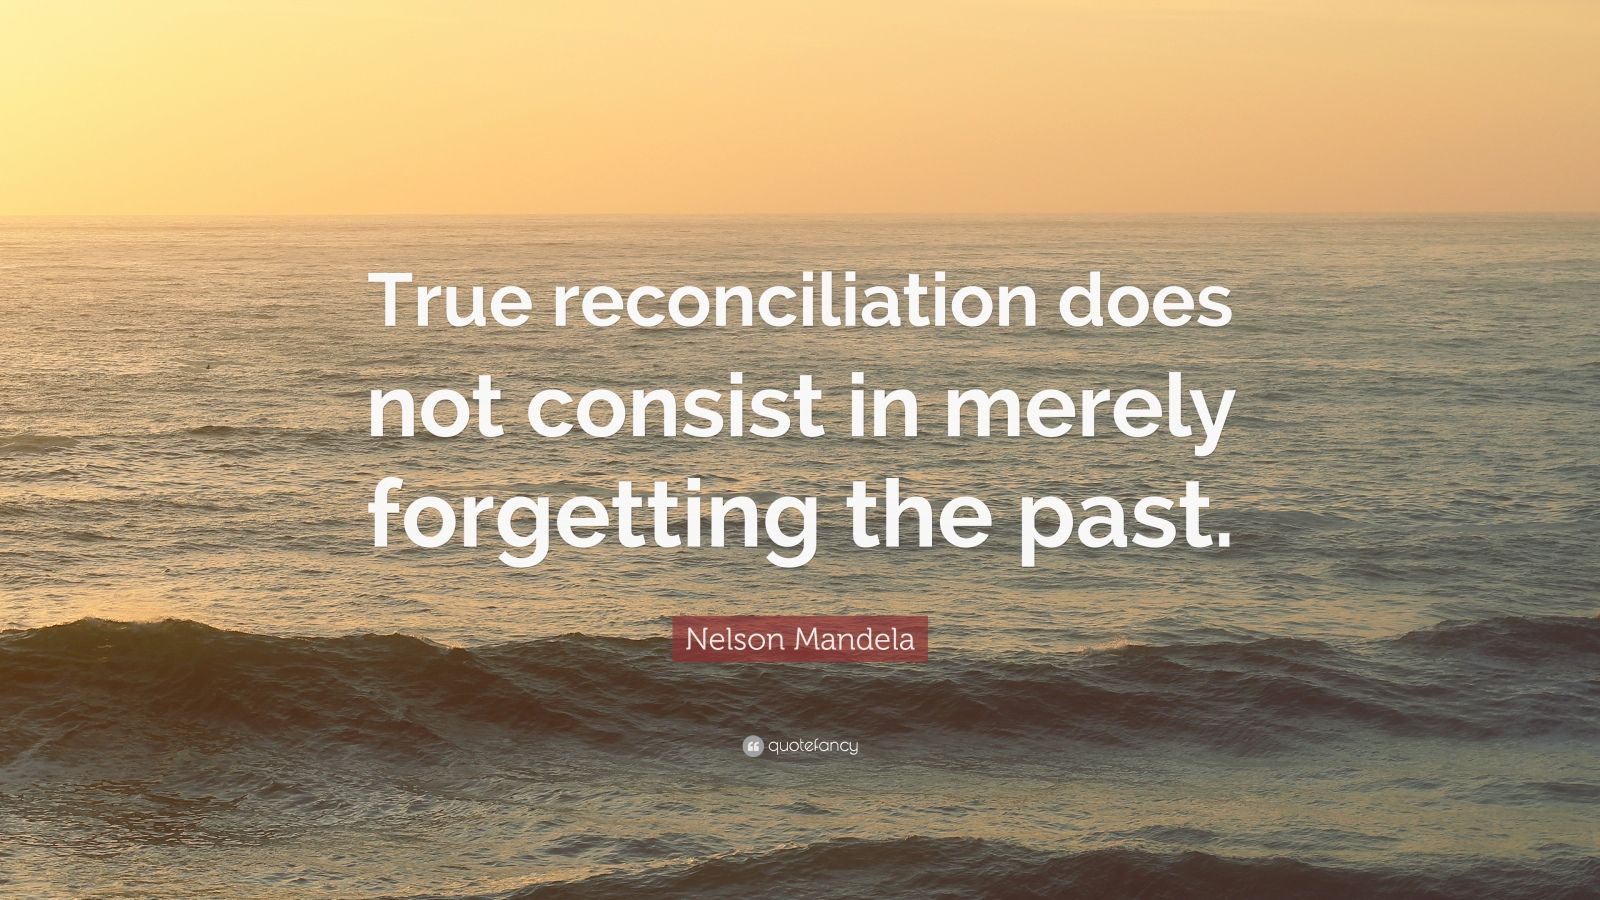 Nelson Mandela Quote: “True reconciliation does not consist in merely